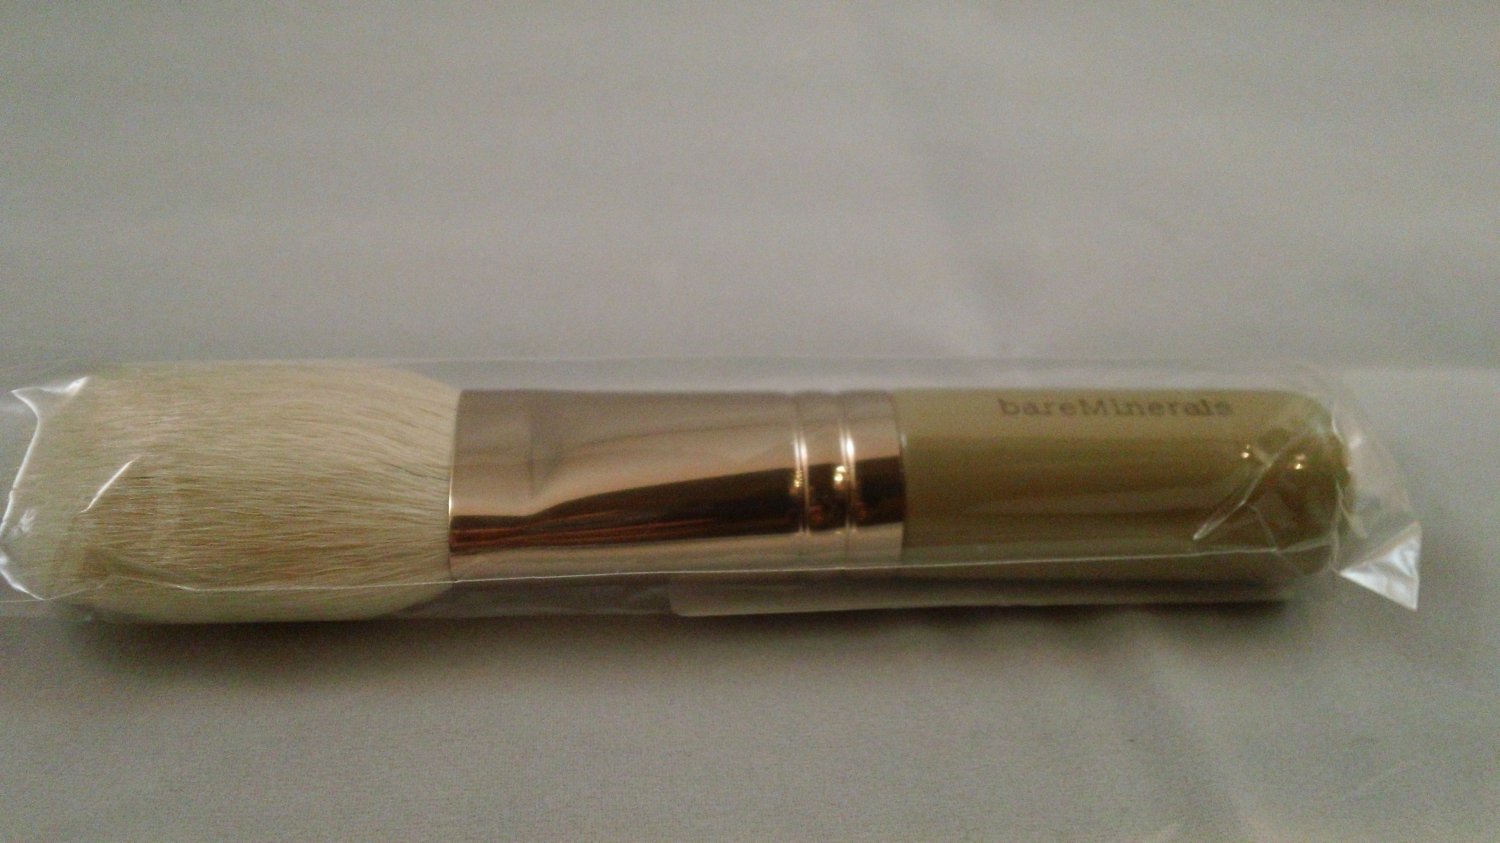 Bare Escentuals bareMinerals Limited Edition Flawless Application Face Brush in Pearl